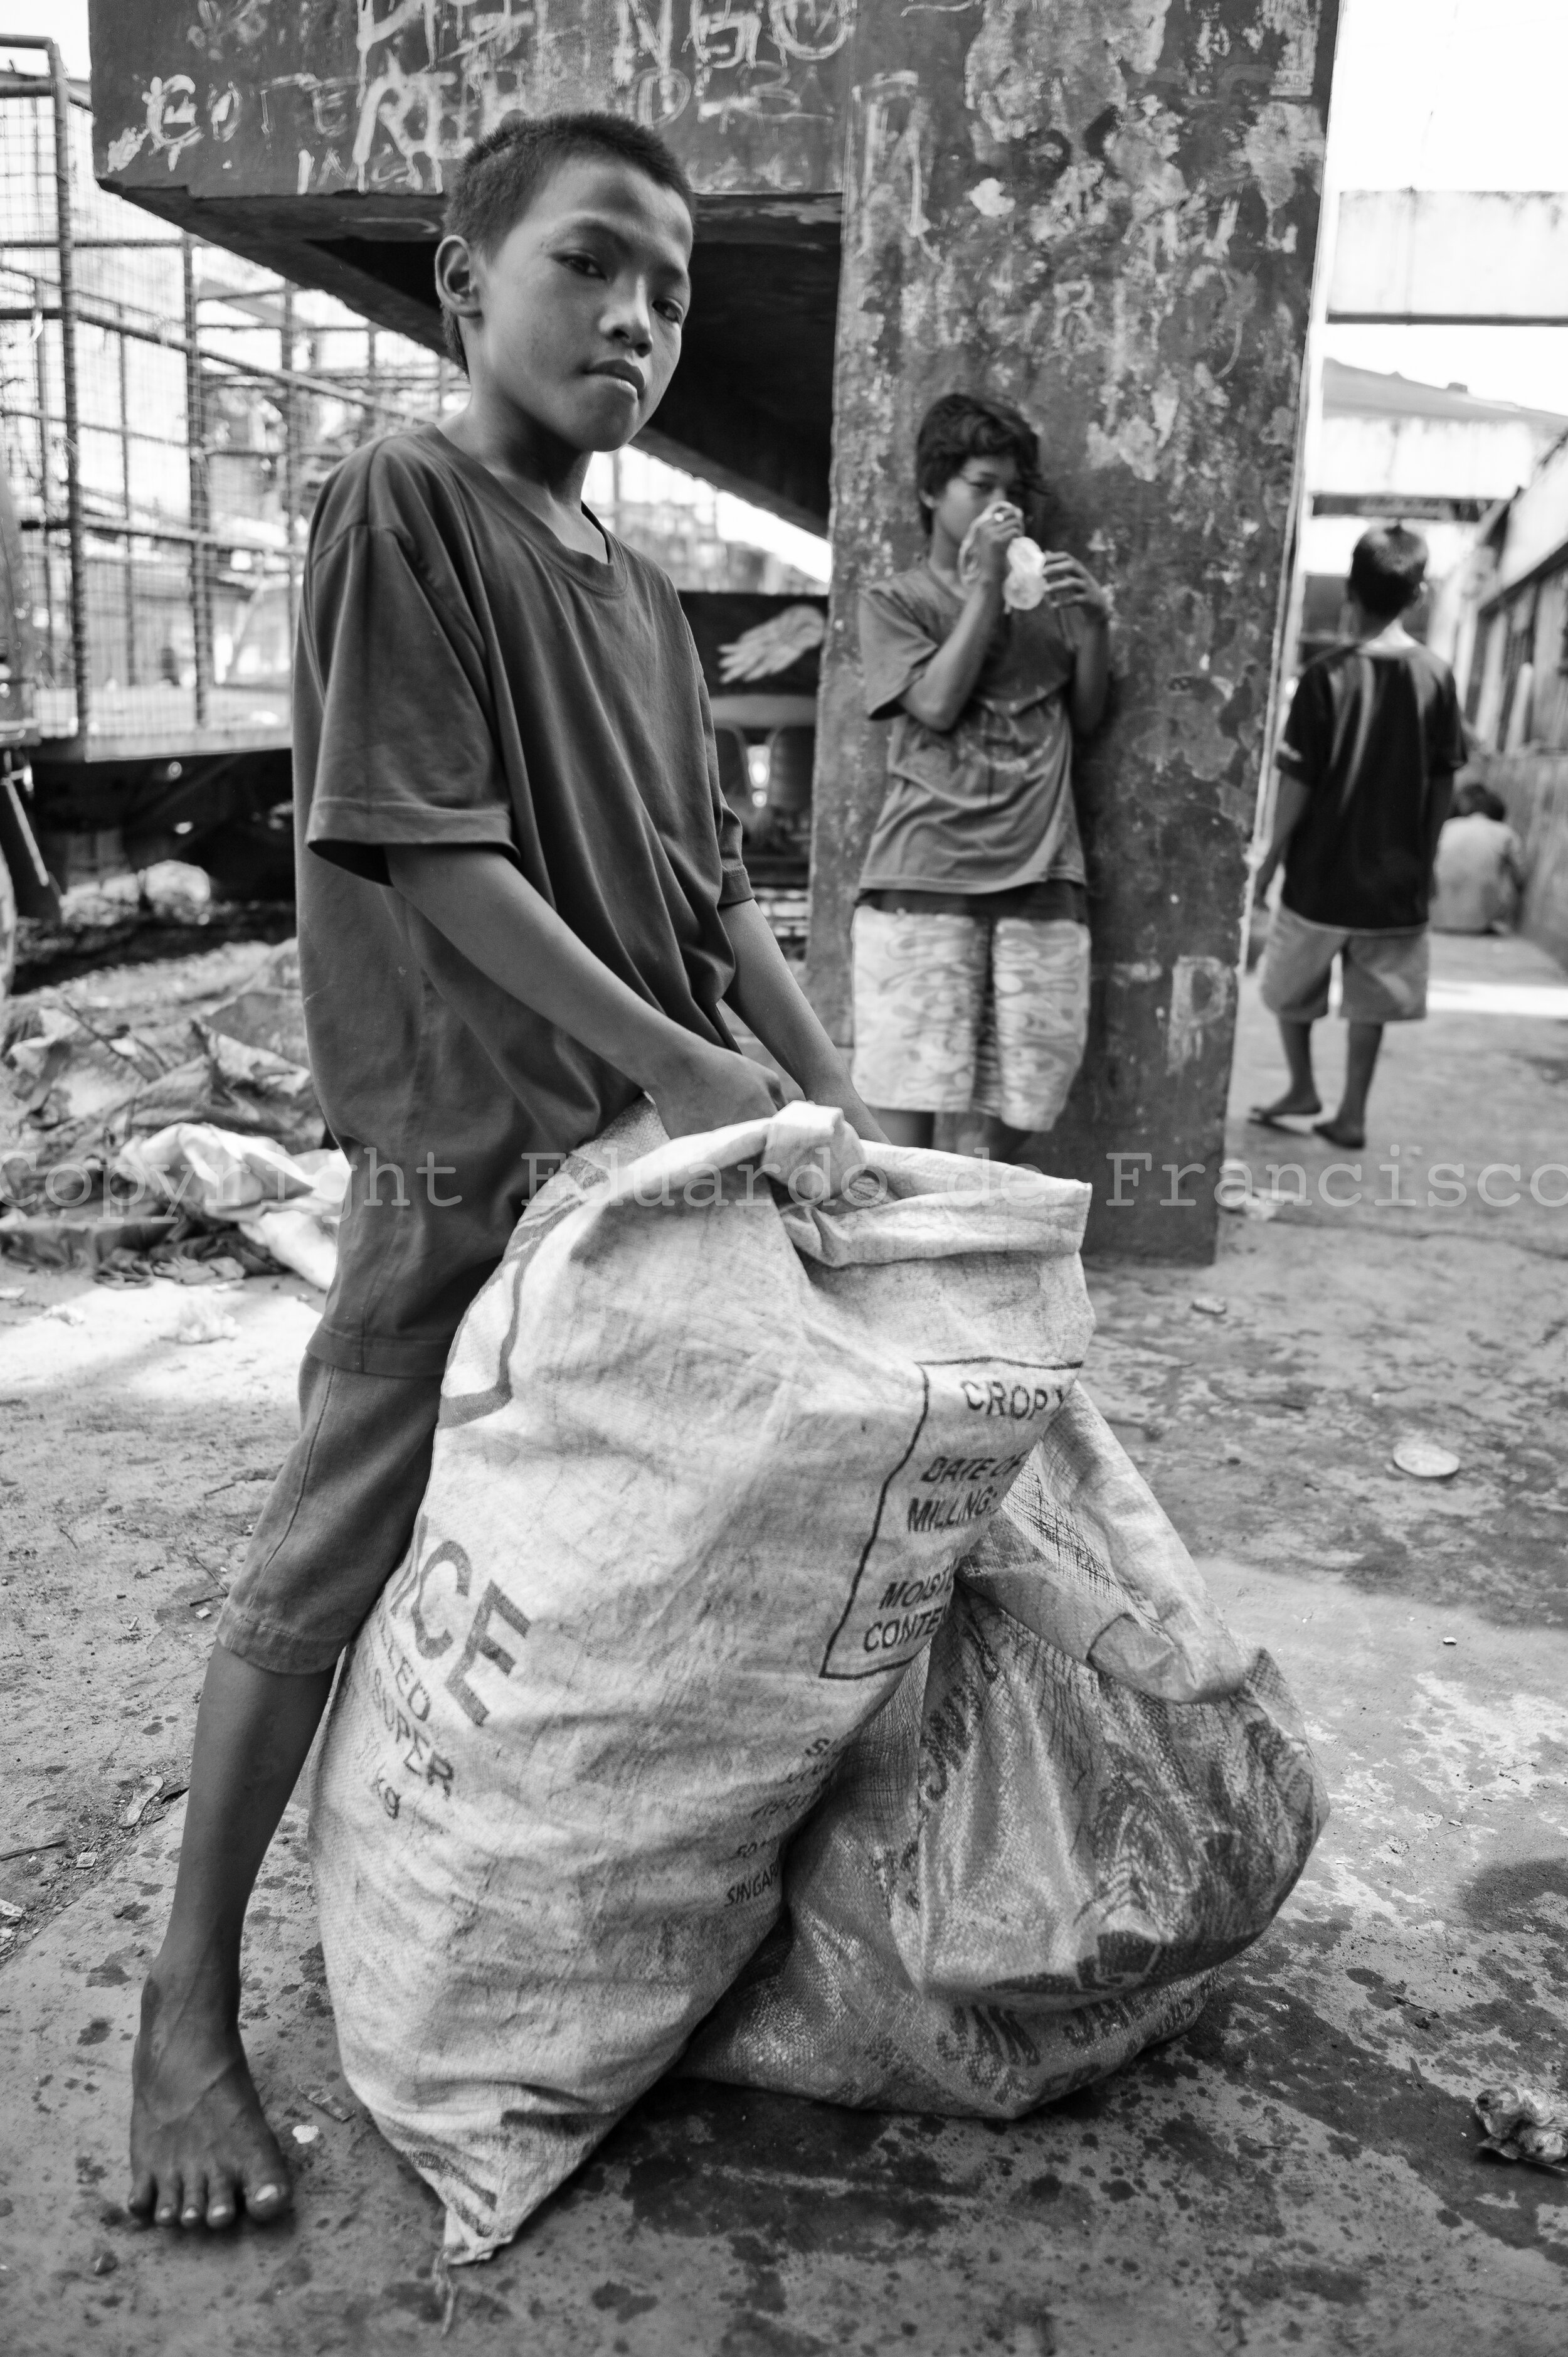  Romel (left), 12 years old. He has 7 brothers and sisters, and lives with his mother and step-father (his father died). He collects rubbish and earns 100 pesos (2 euro) per day. Like most of children of his age, he inhales three bags of glue every d